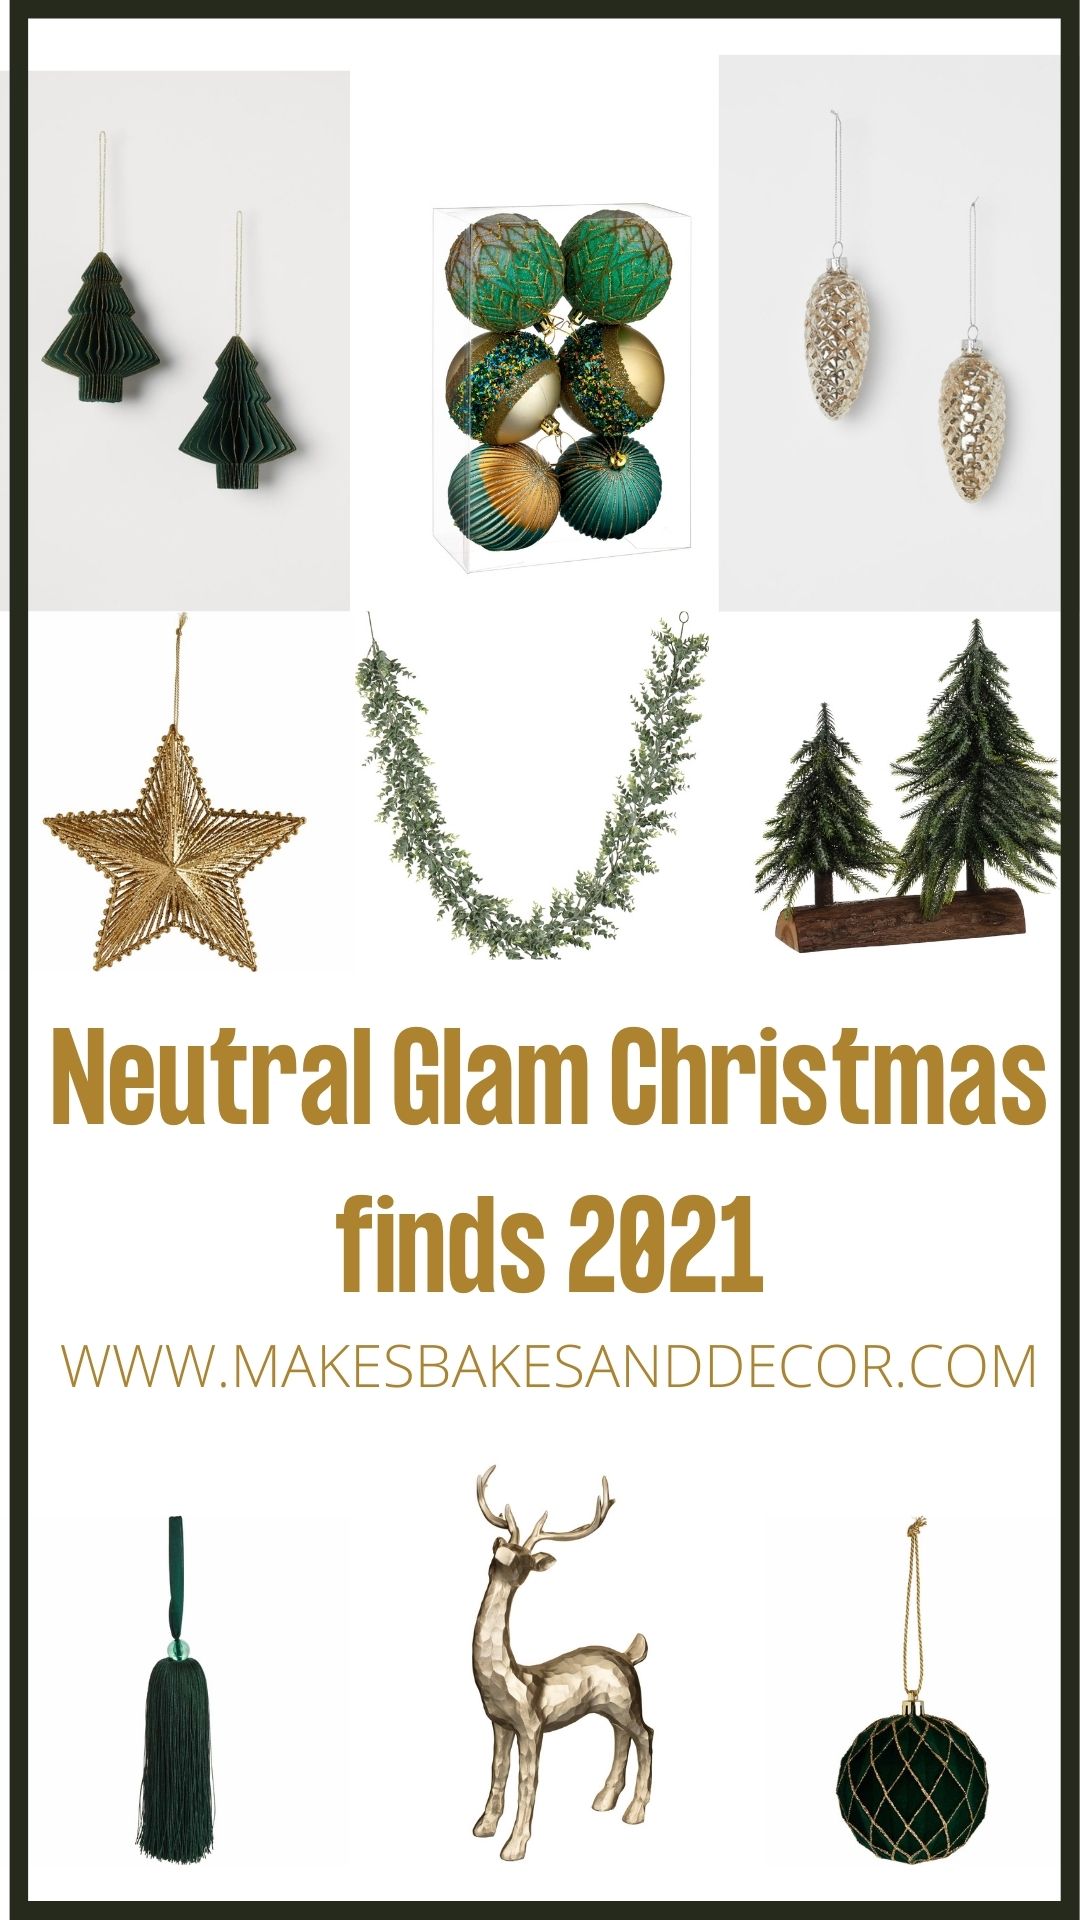 Neutral Glam Christmas finds